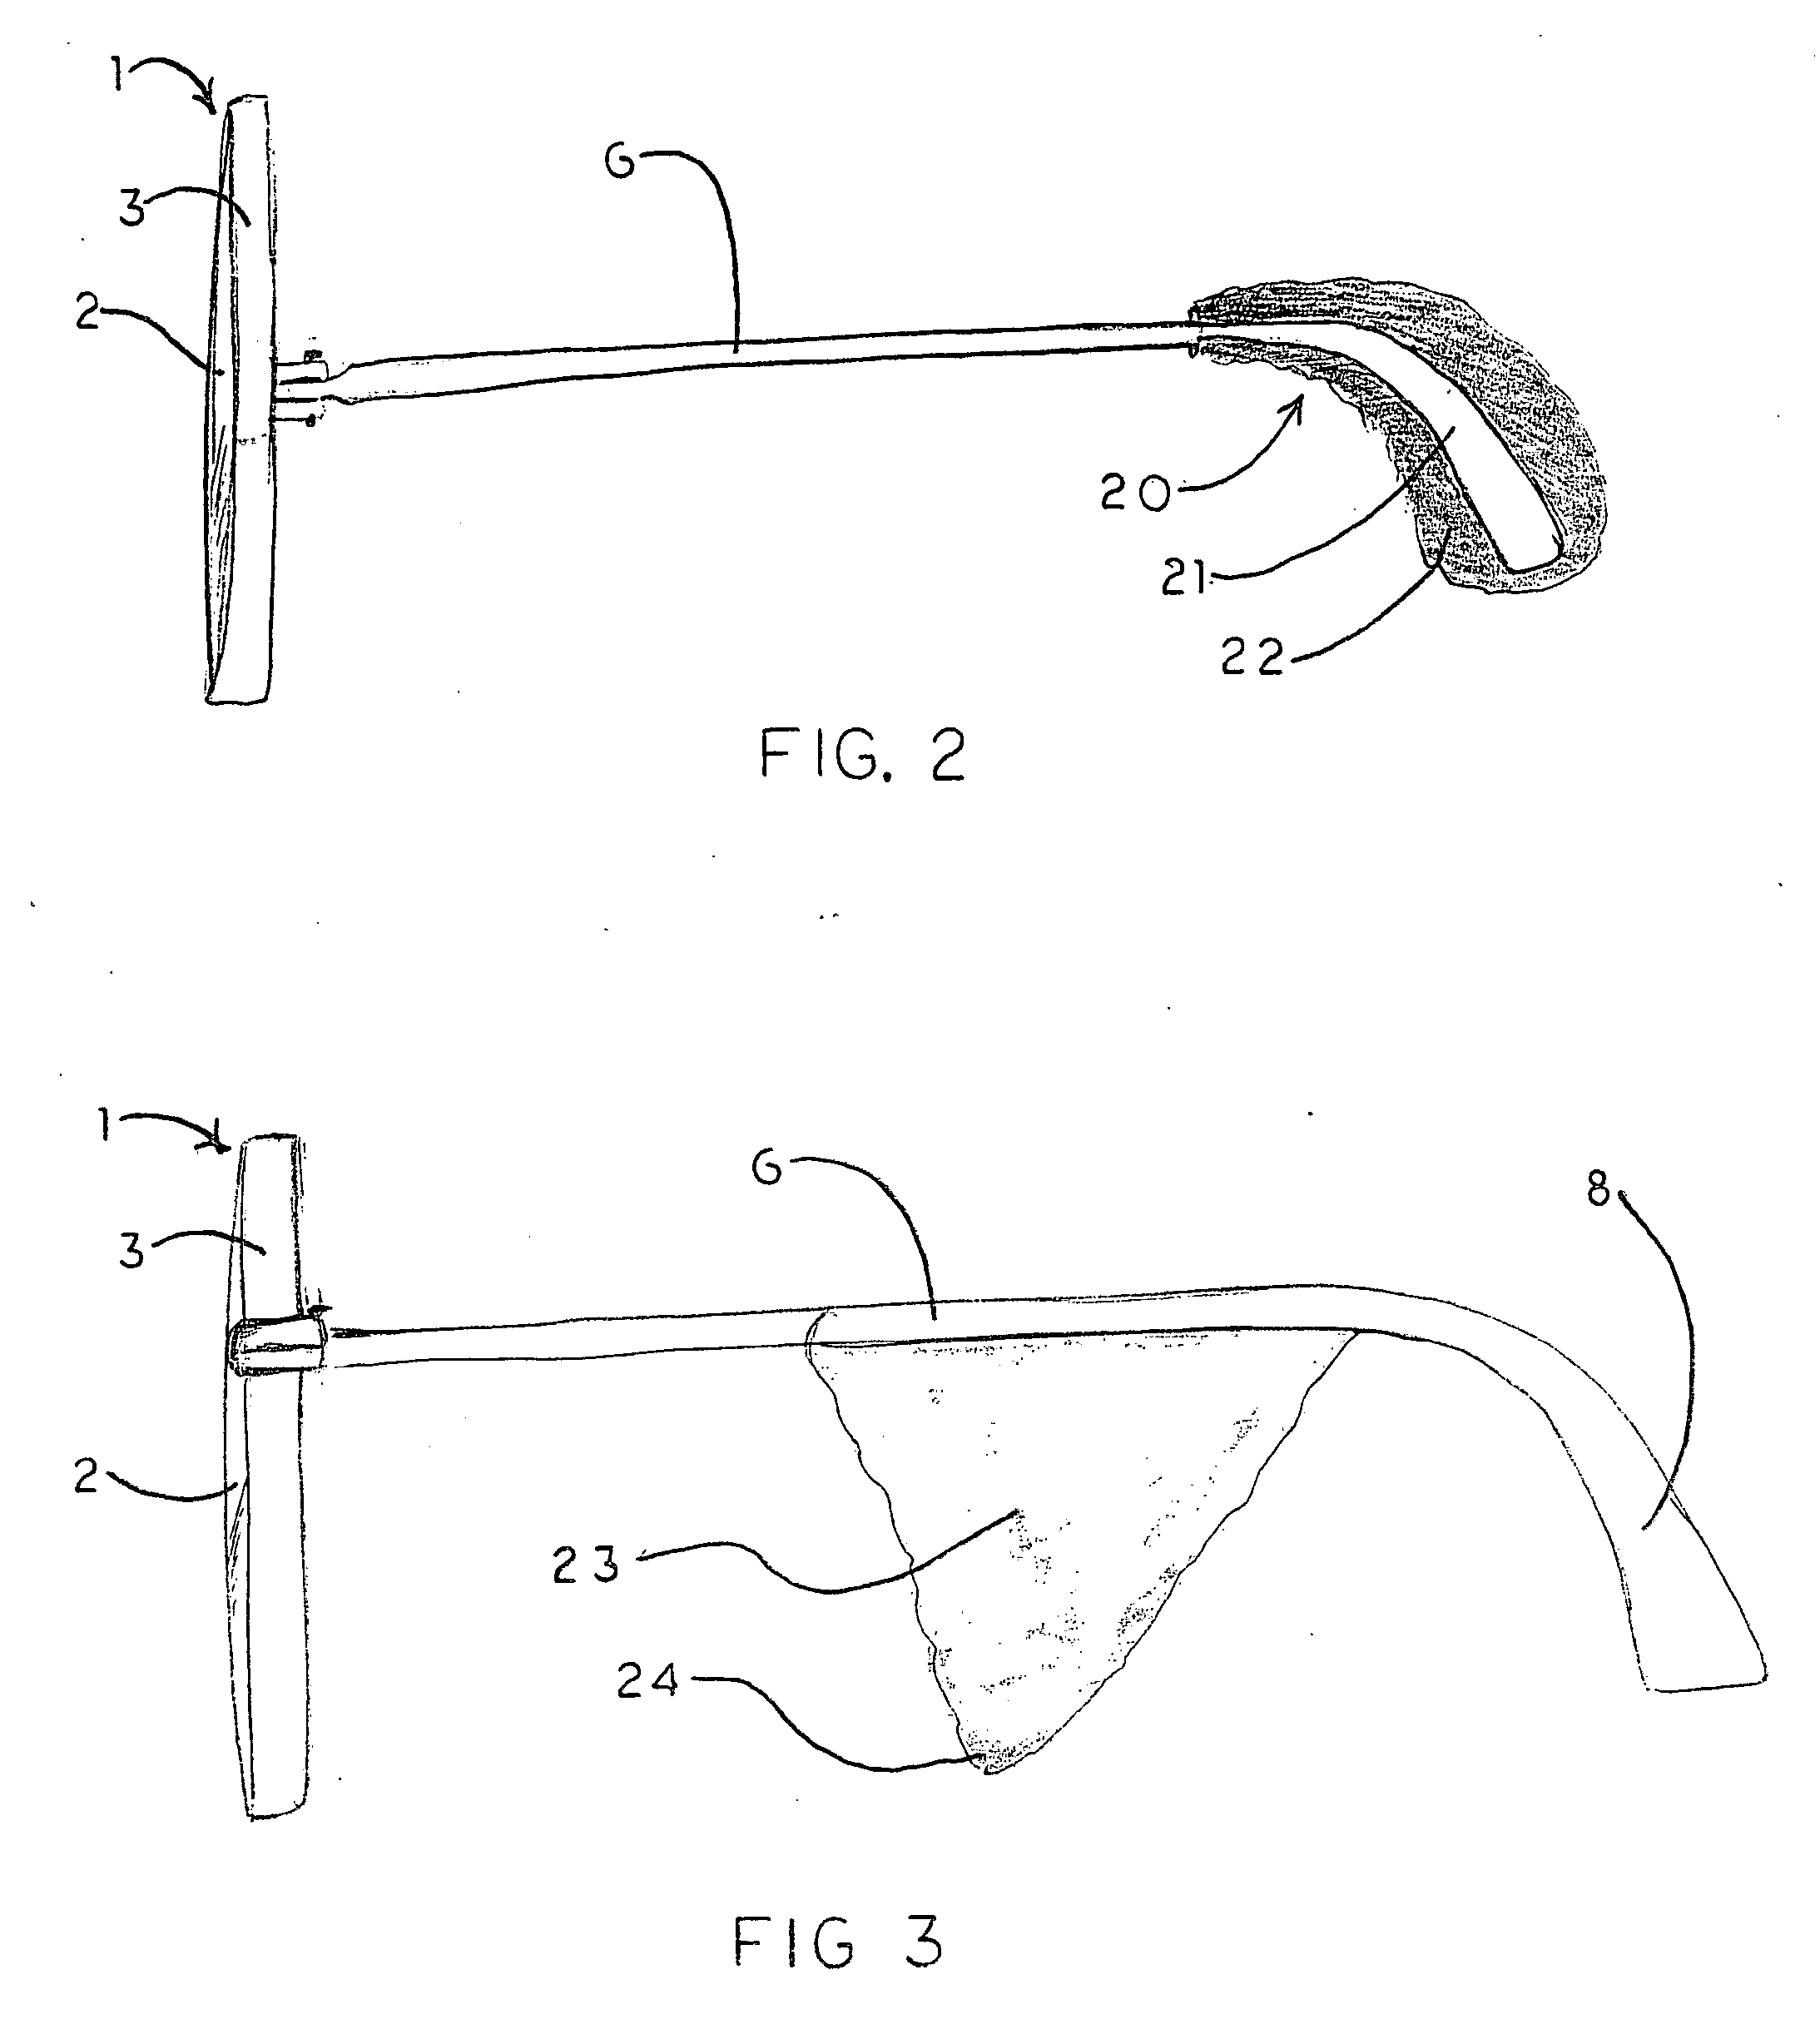 Eyeglasses with temple arm supports